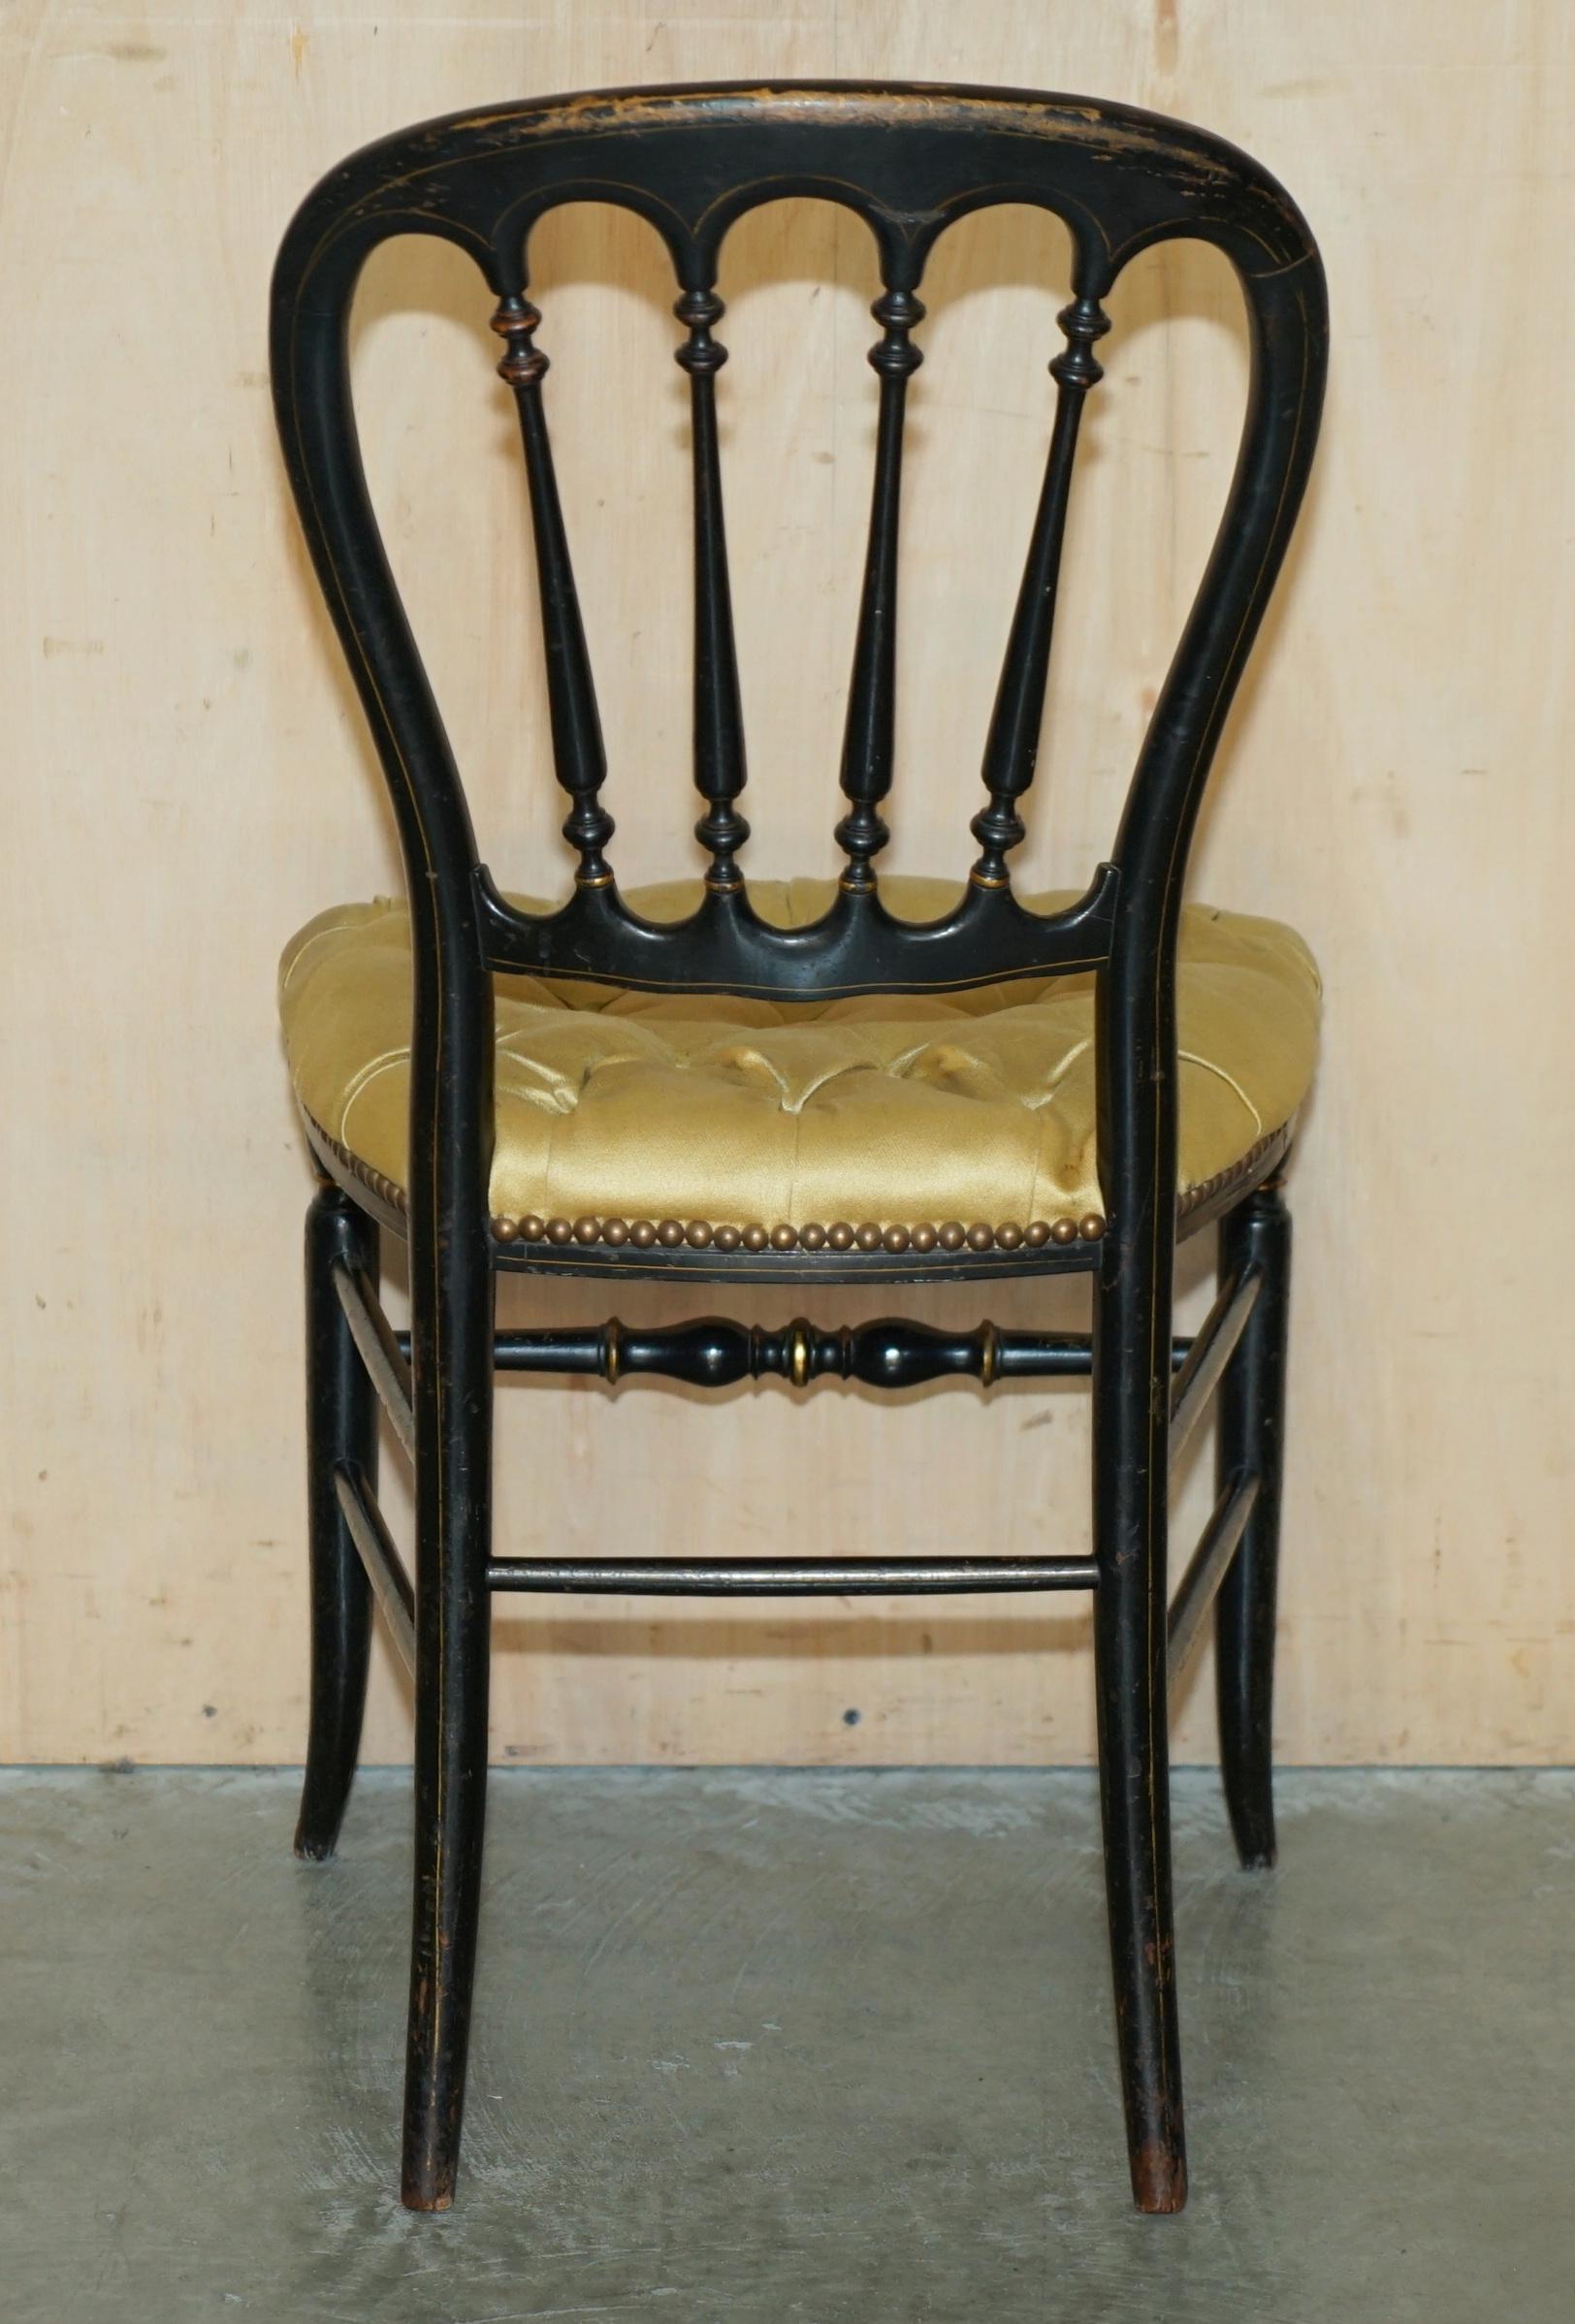 ANTIQUE REGENCY 1815 EBONiSED MOTHER OF PEARL SILK CHESTERFIELD SEAT SIDE CHAIR For Sale 11